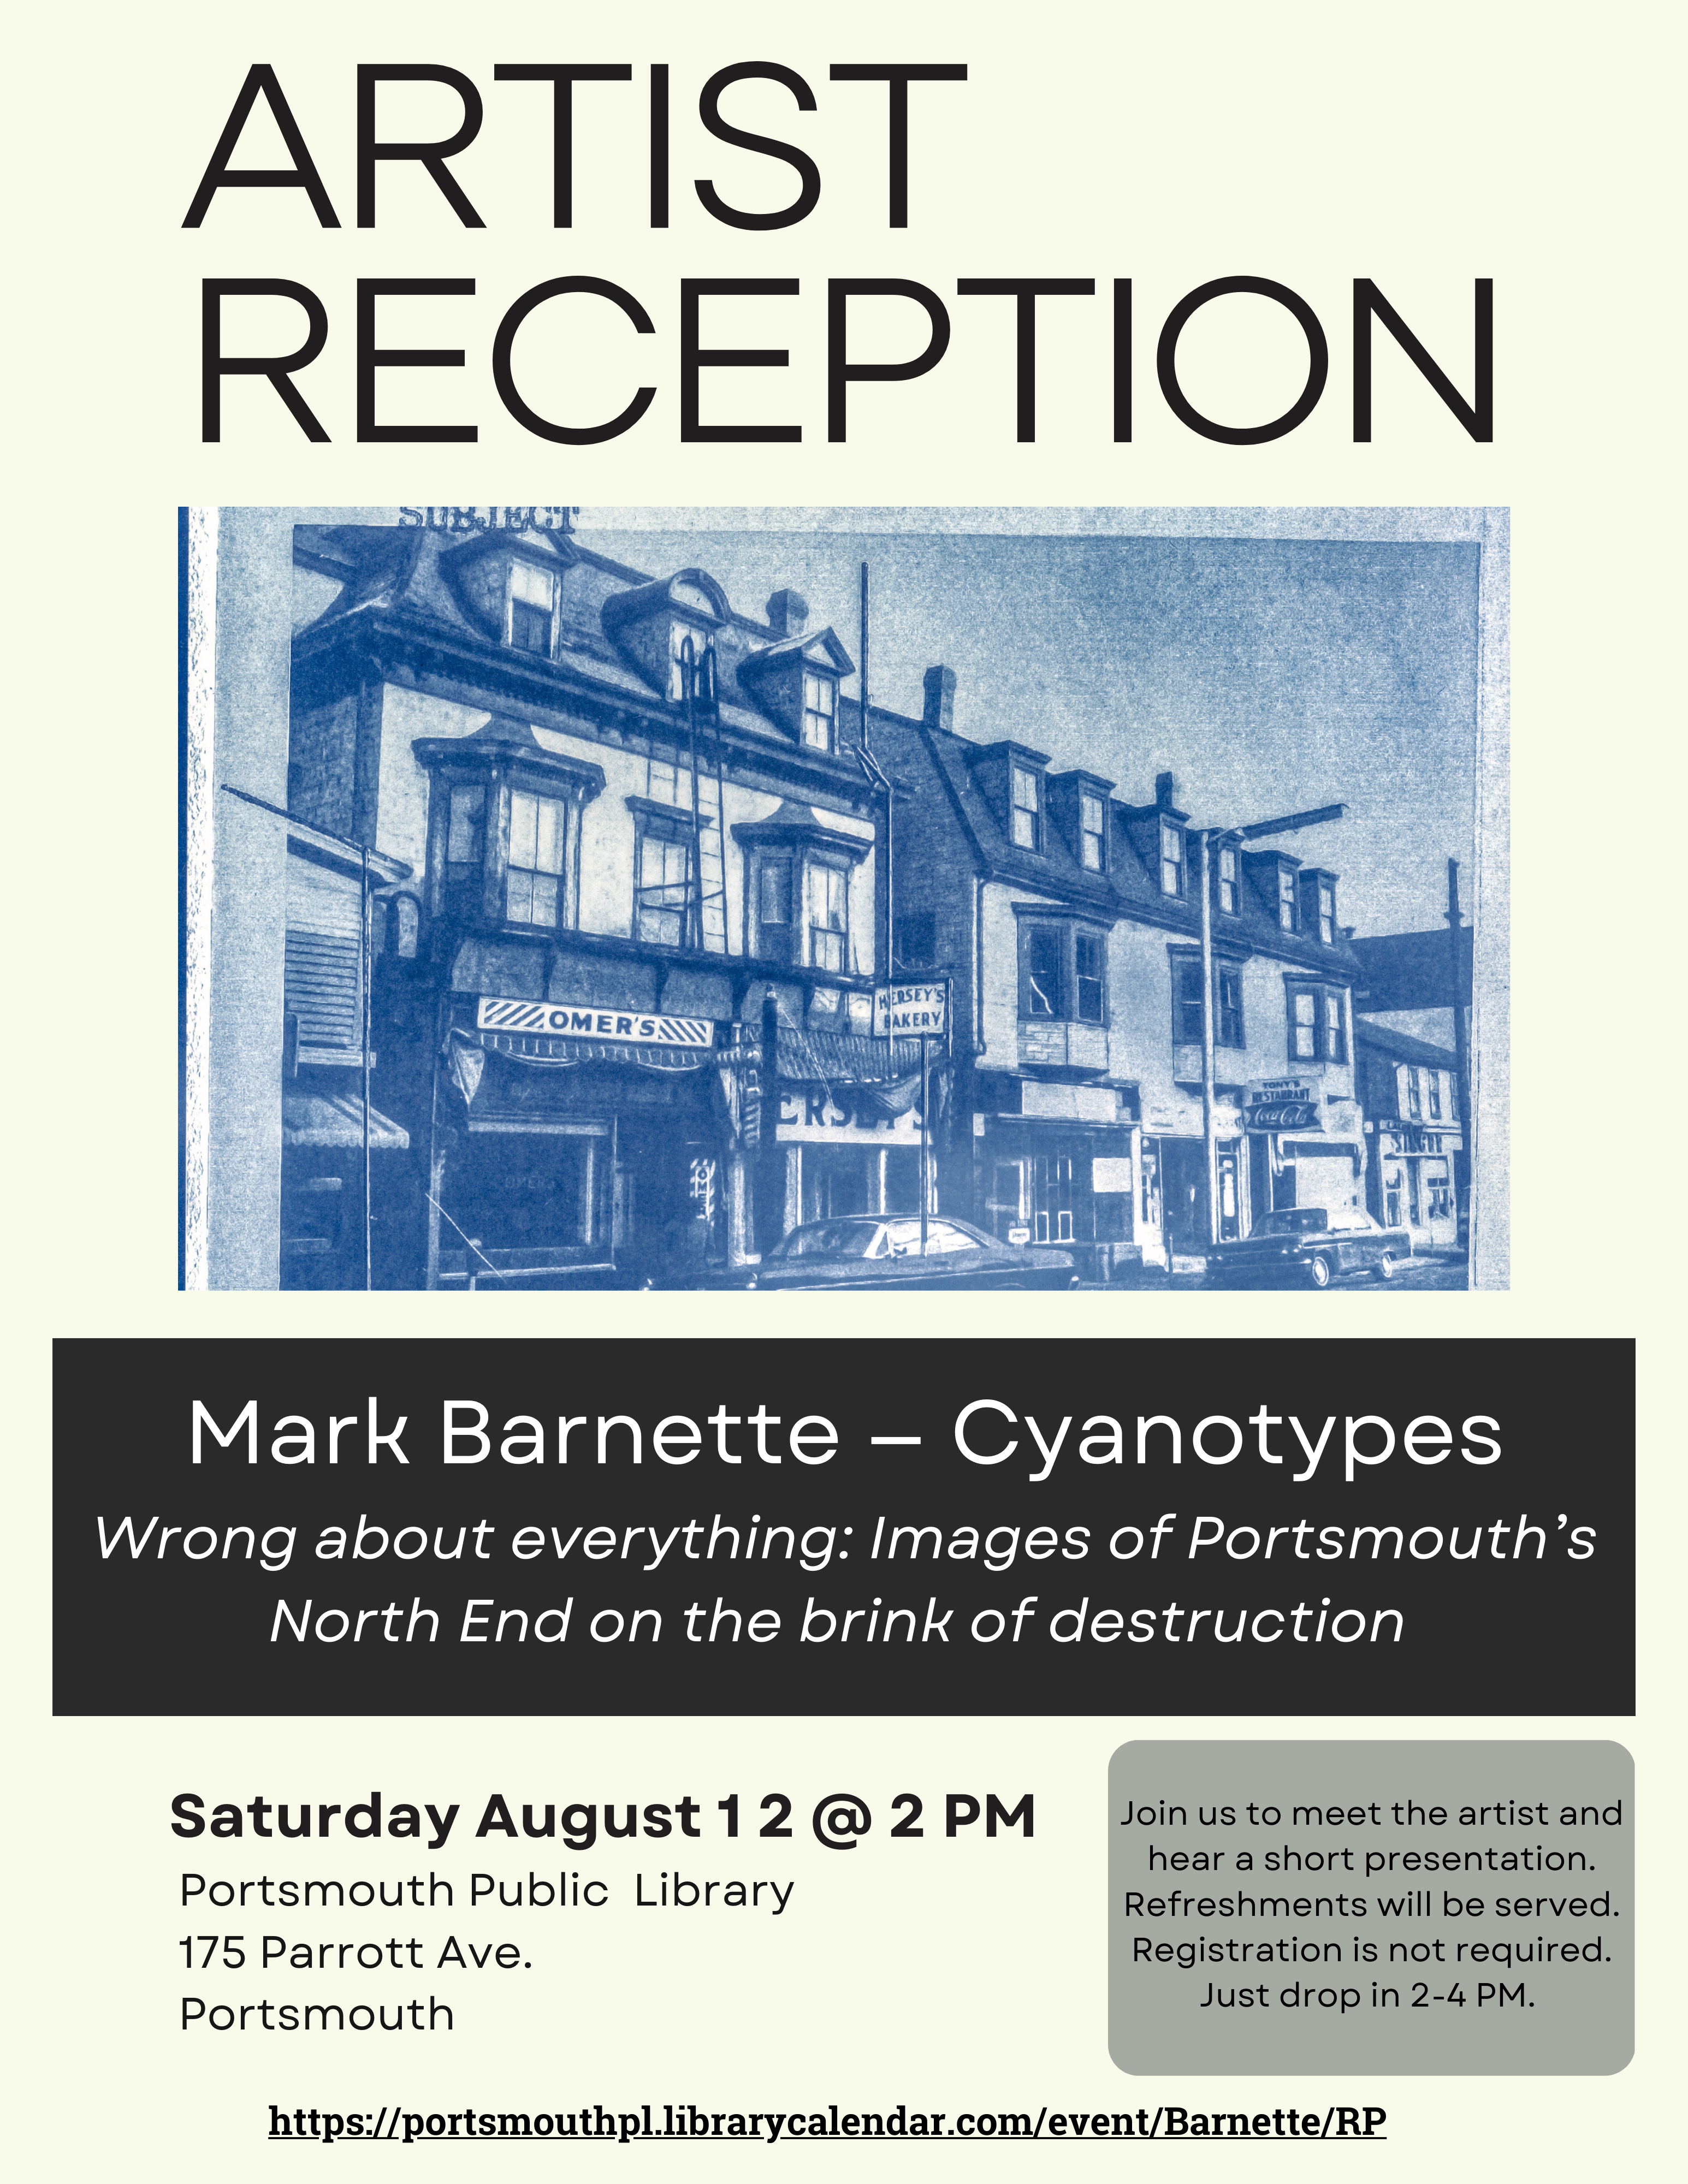 Artist Reception Mark Barnette Cyanotypes Portsmouth Public Library August 12 at 2 PM. Image of building on Congress Street Portsmouth, NH.